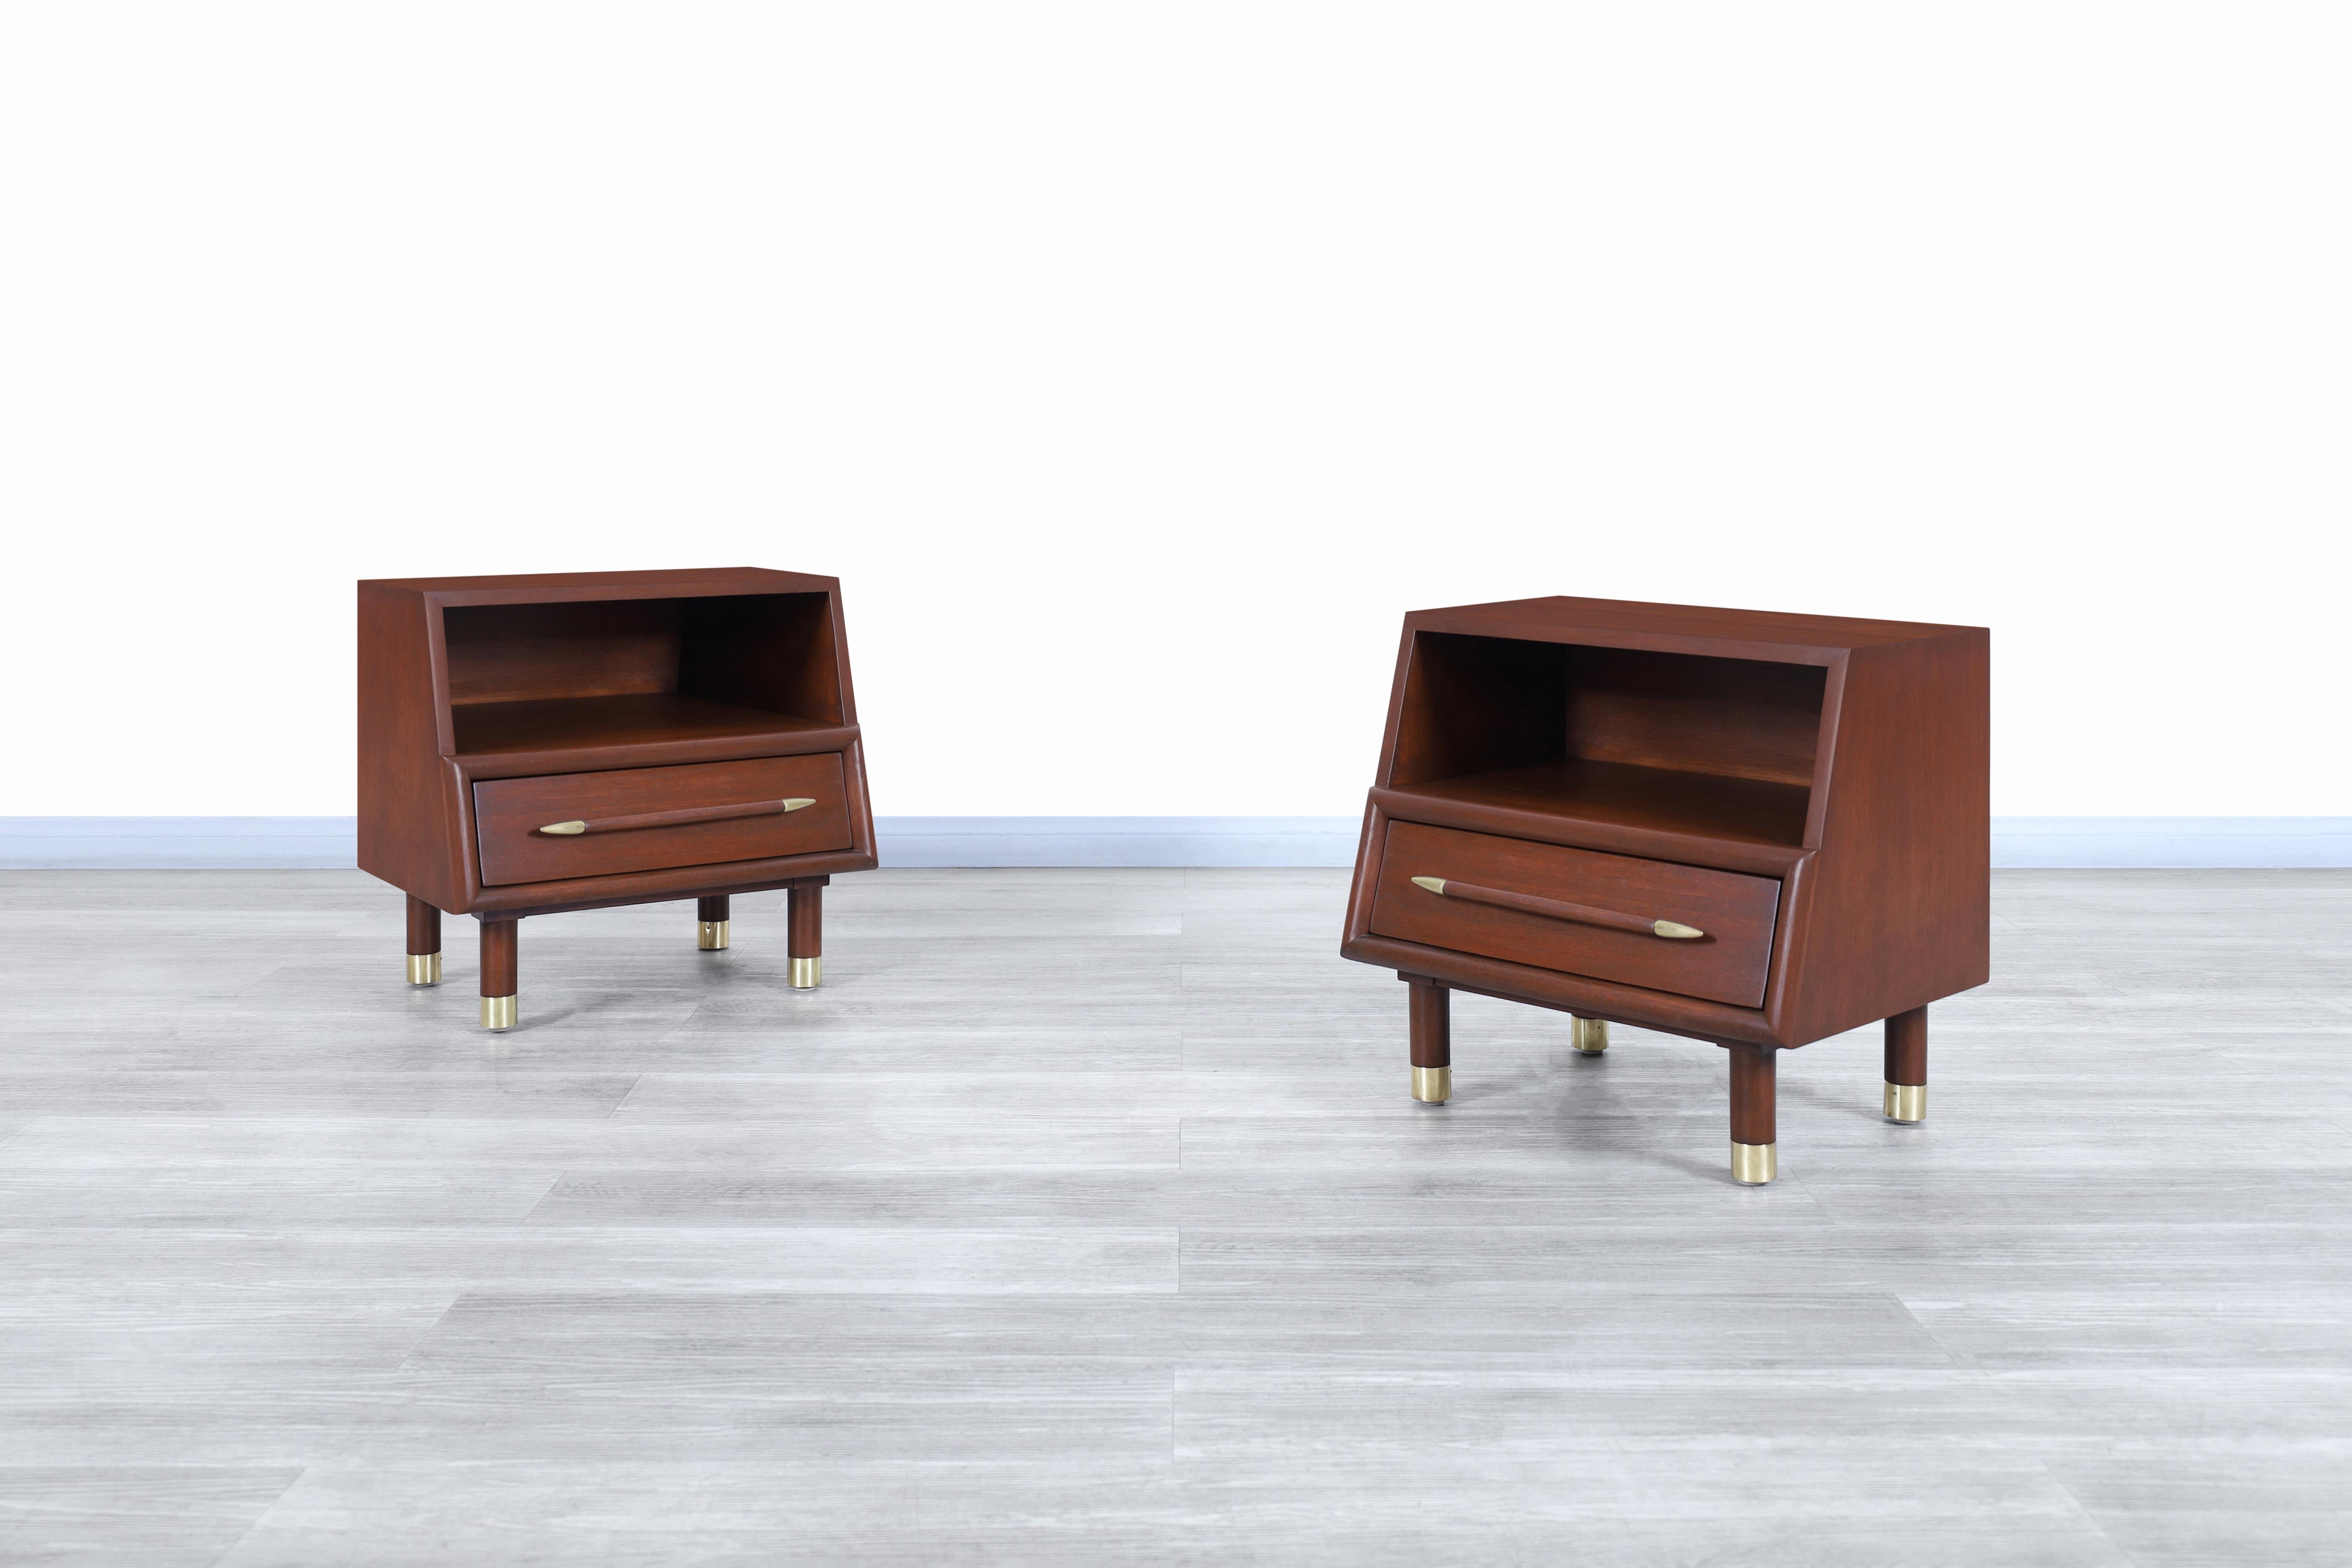 Fabulous midcentury walnut nightstands designed by John Keal for Brown Saltman in the United States, circa 1950s. These nightstands have a very particular and avant-garde geometric design. Each nightstand has been built from the highest quality